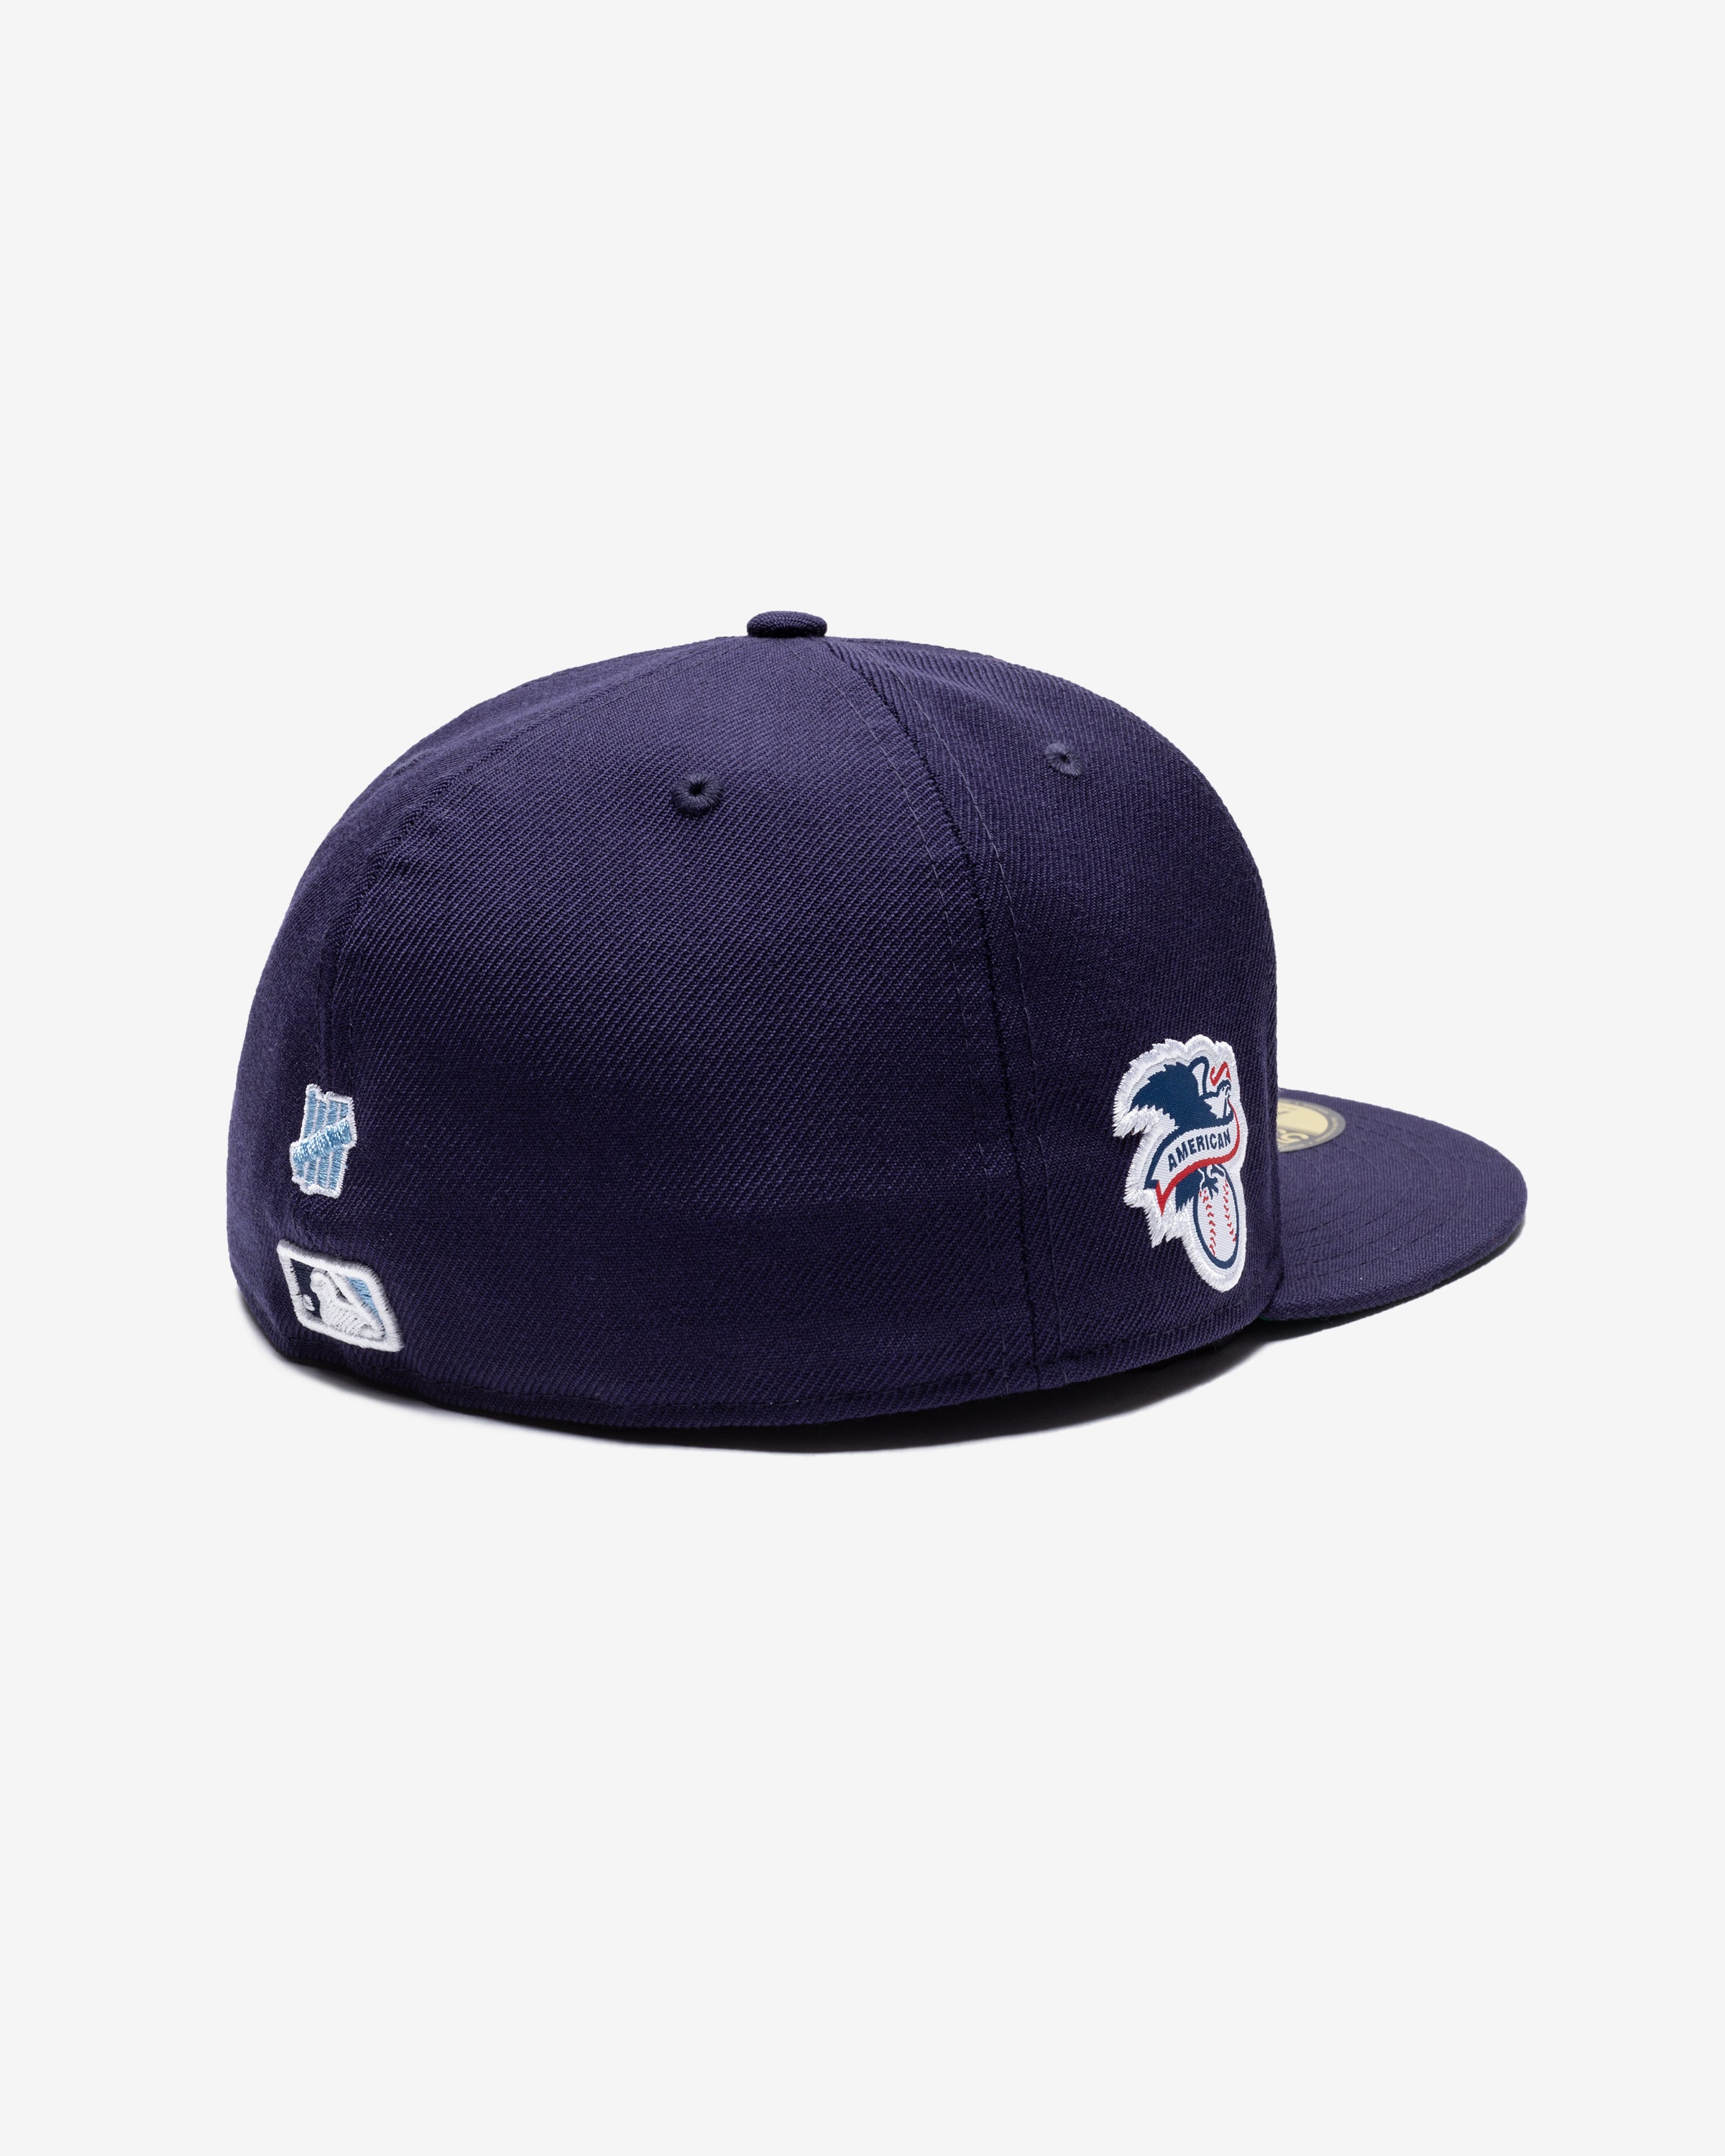 UNDEFEATED X NE X MLB FITTED - TAMPA BAY RAYS